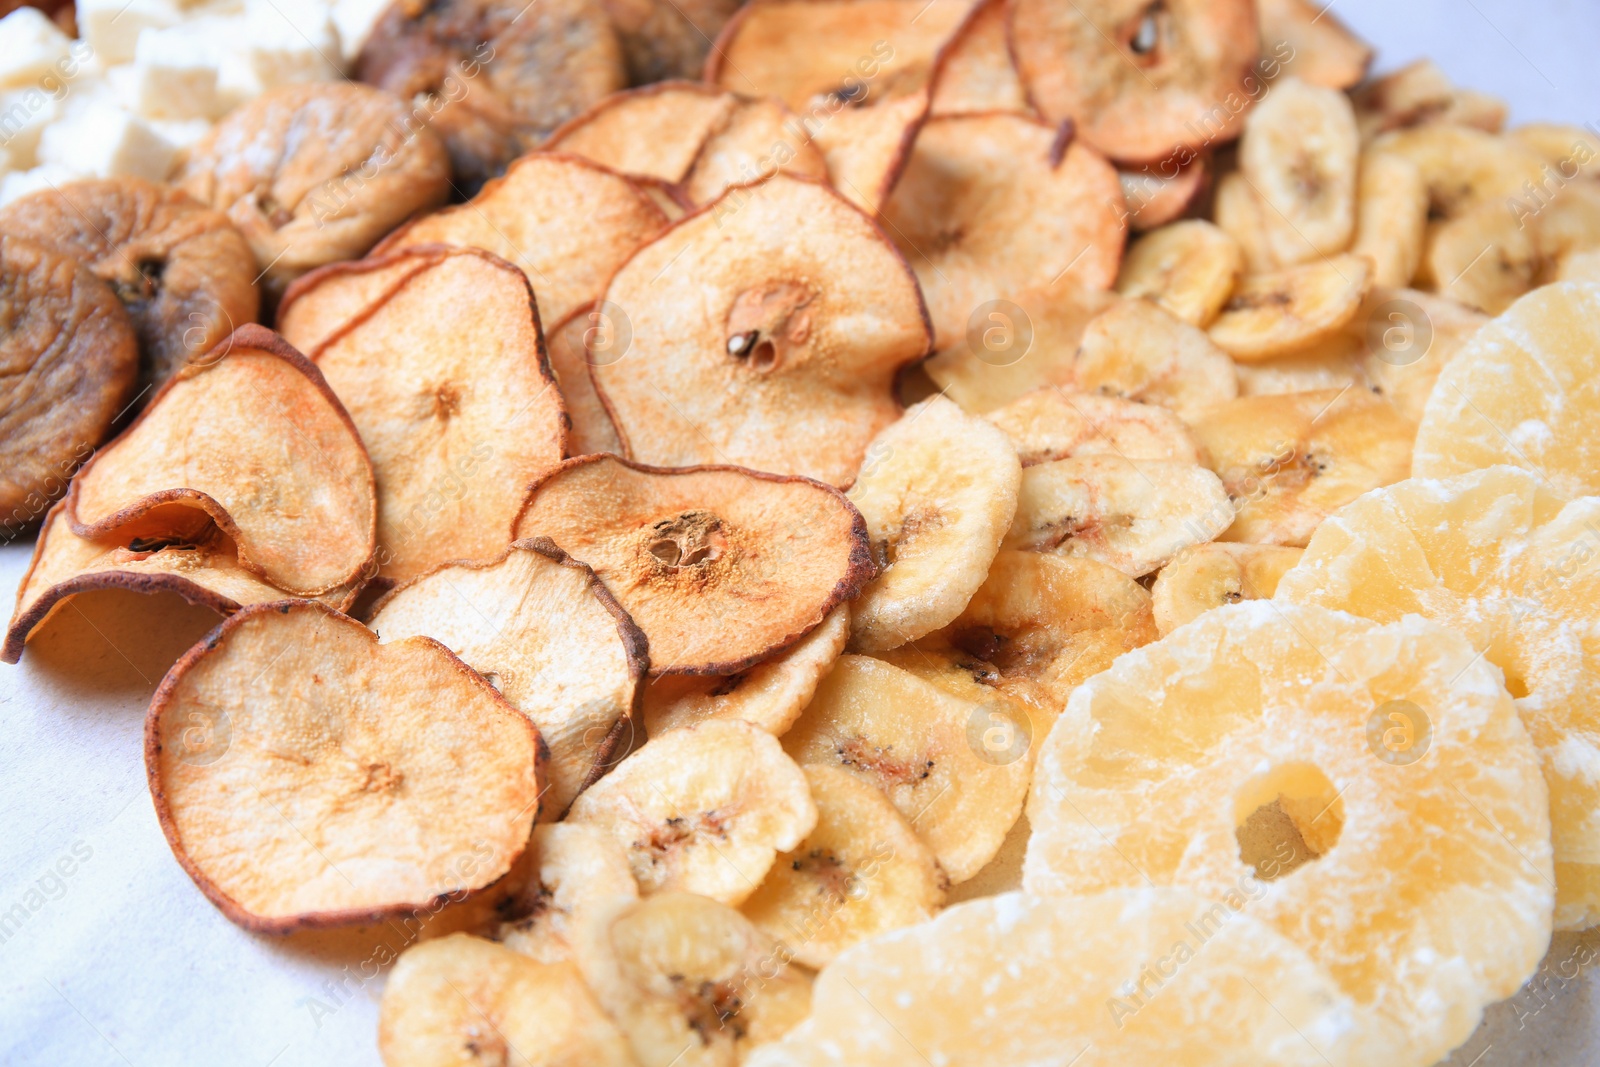 Photo of Different tasty dried fruits on paper, closeup